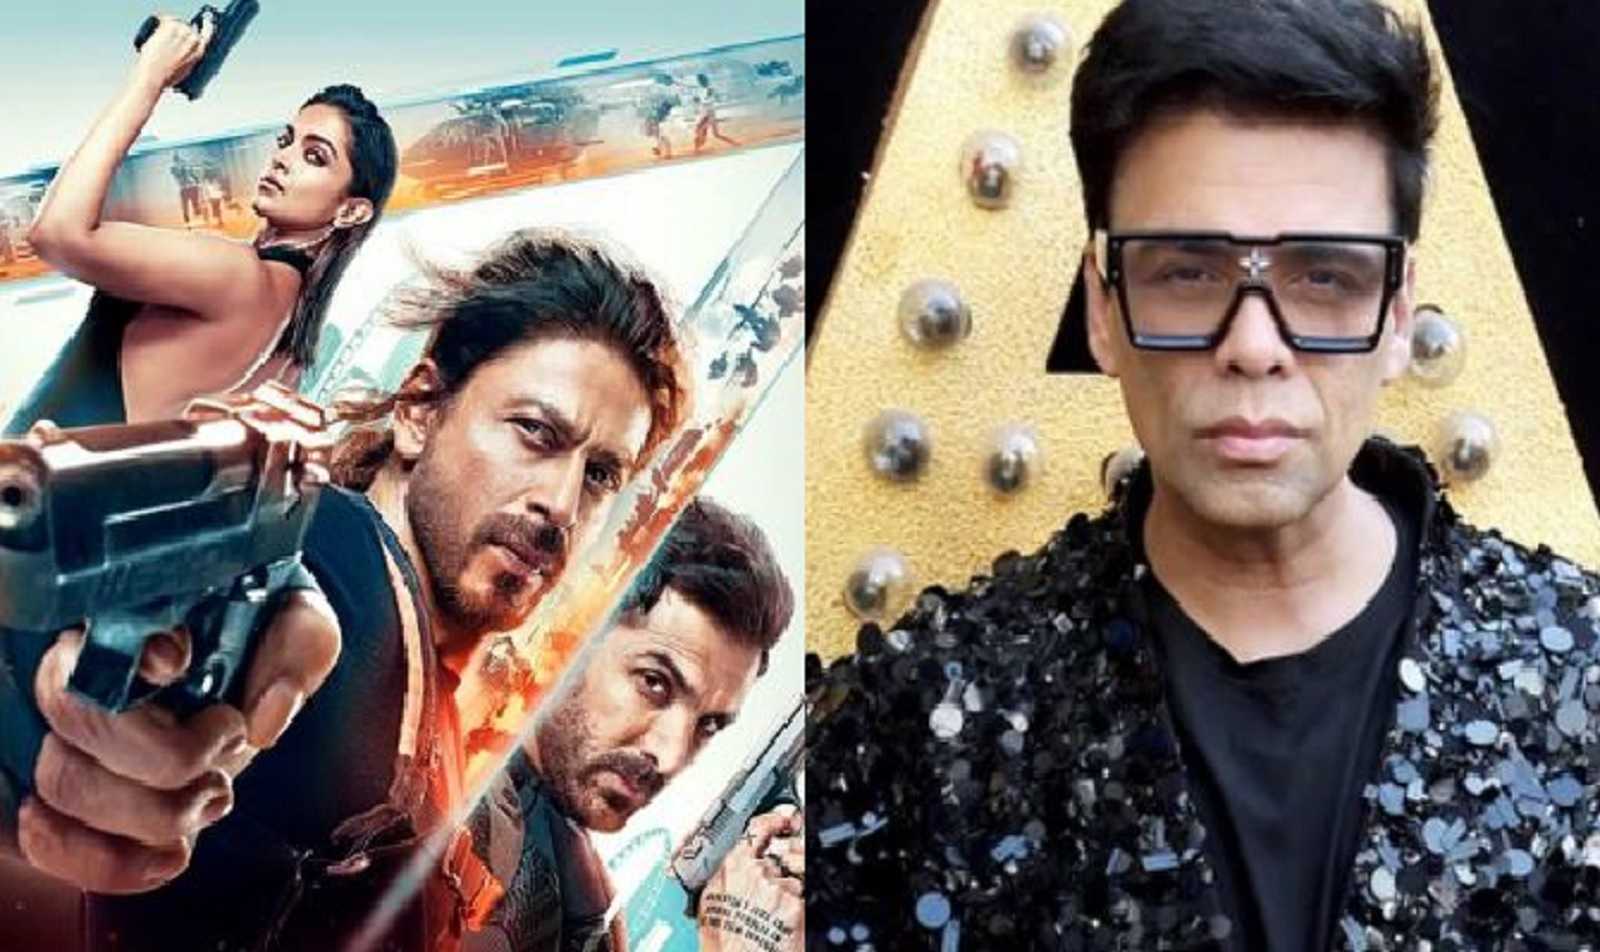 Karan Johar takes a dig at boycott gang as he heaps praises on Shah Rukh Khan's Pathaan: 'no one can stand in your way'